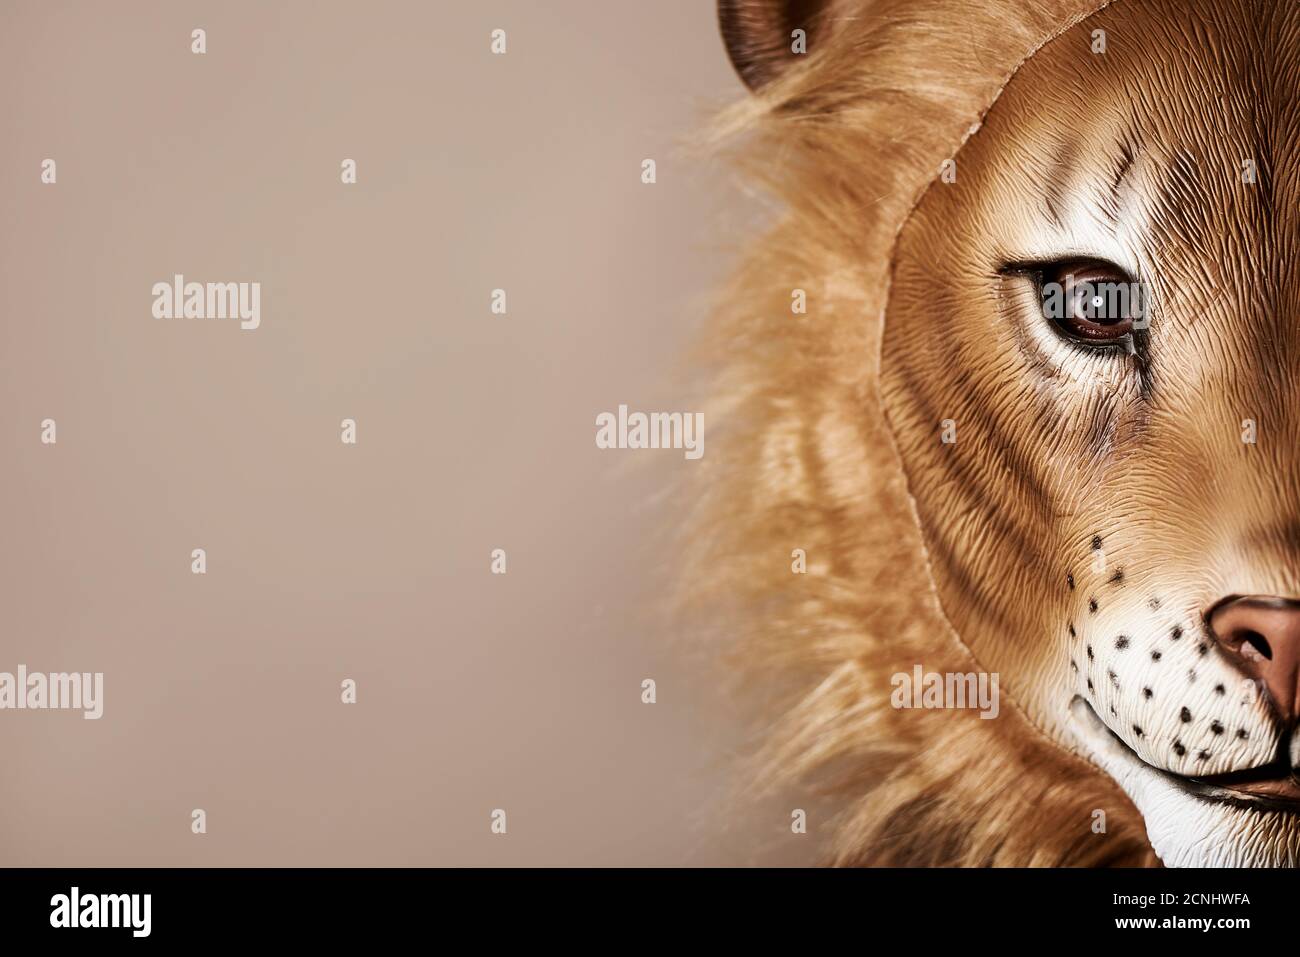 portrait of a man wearing a lion mask against a beige background with some blank space on the left Stock Photo